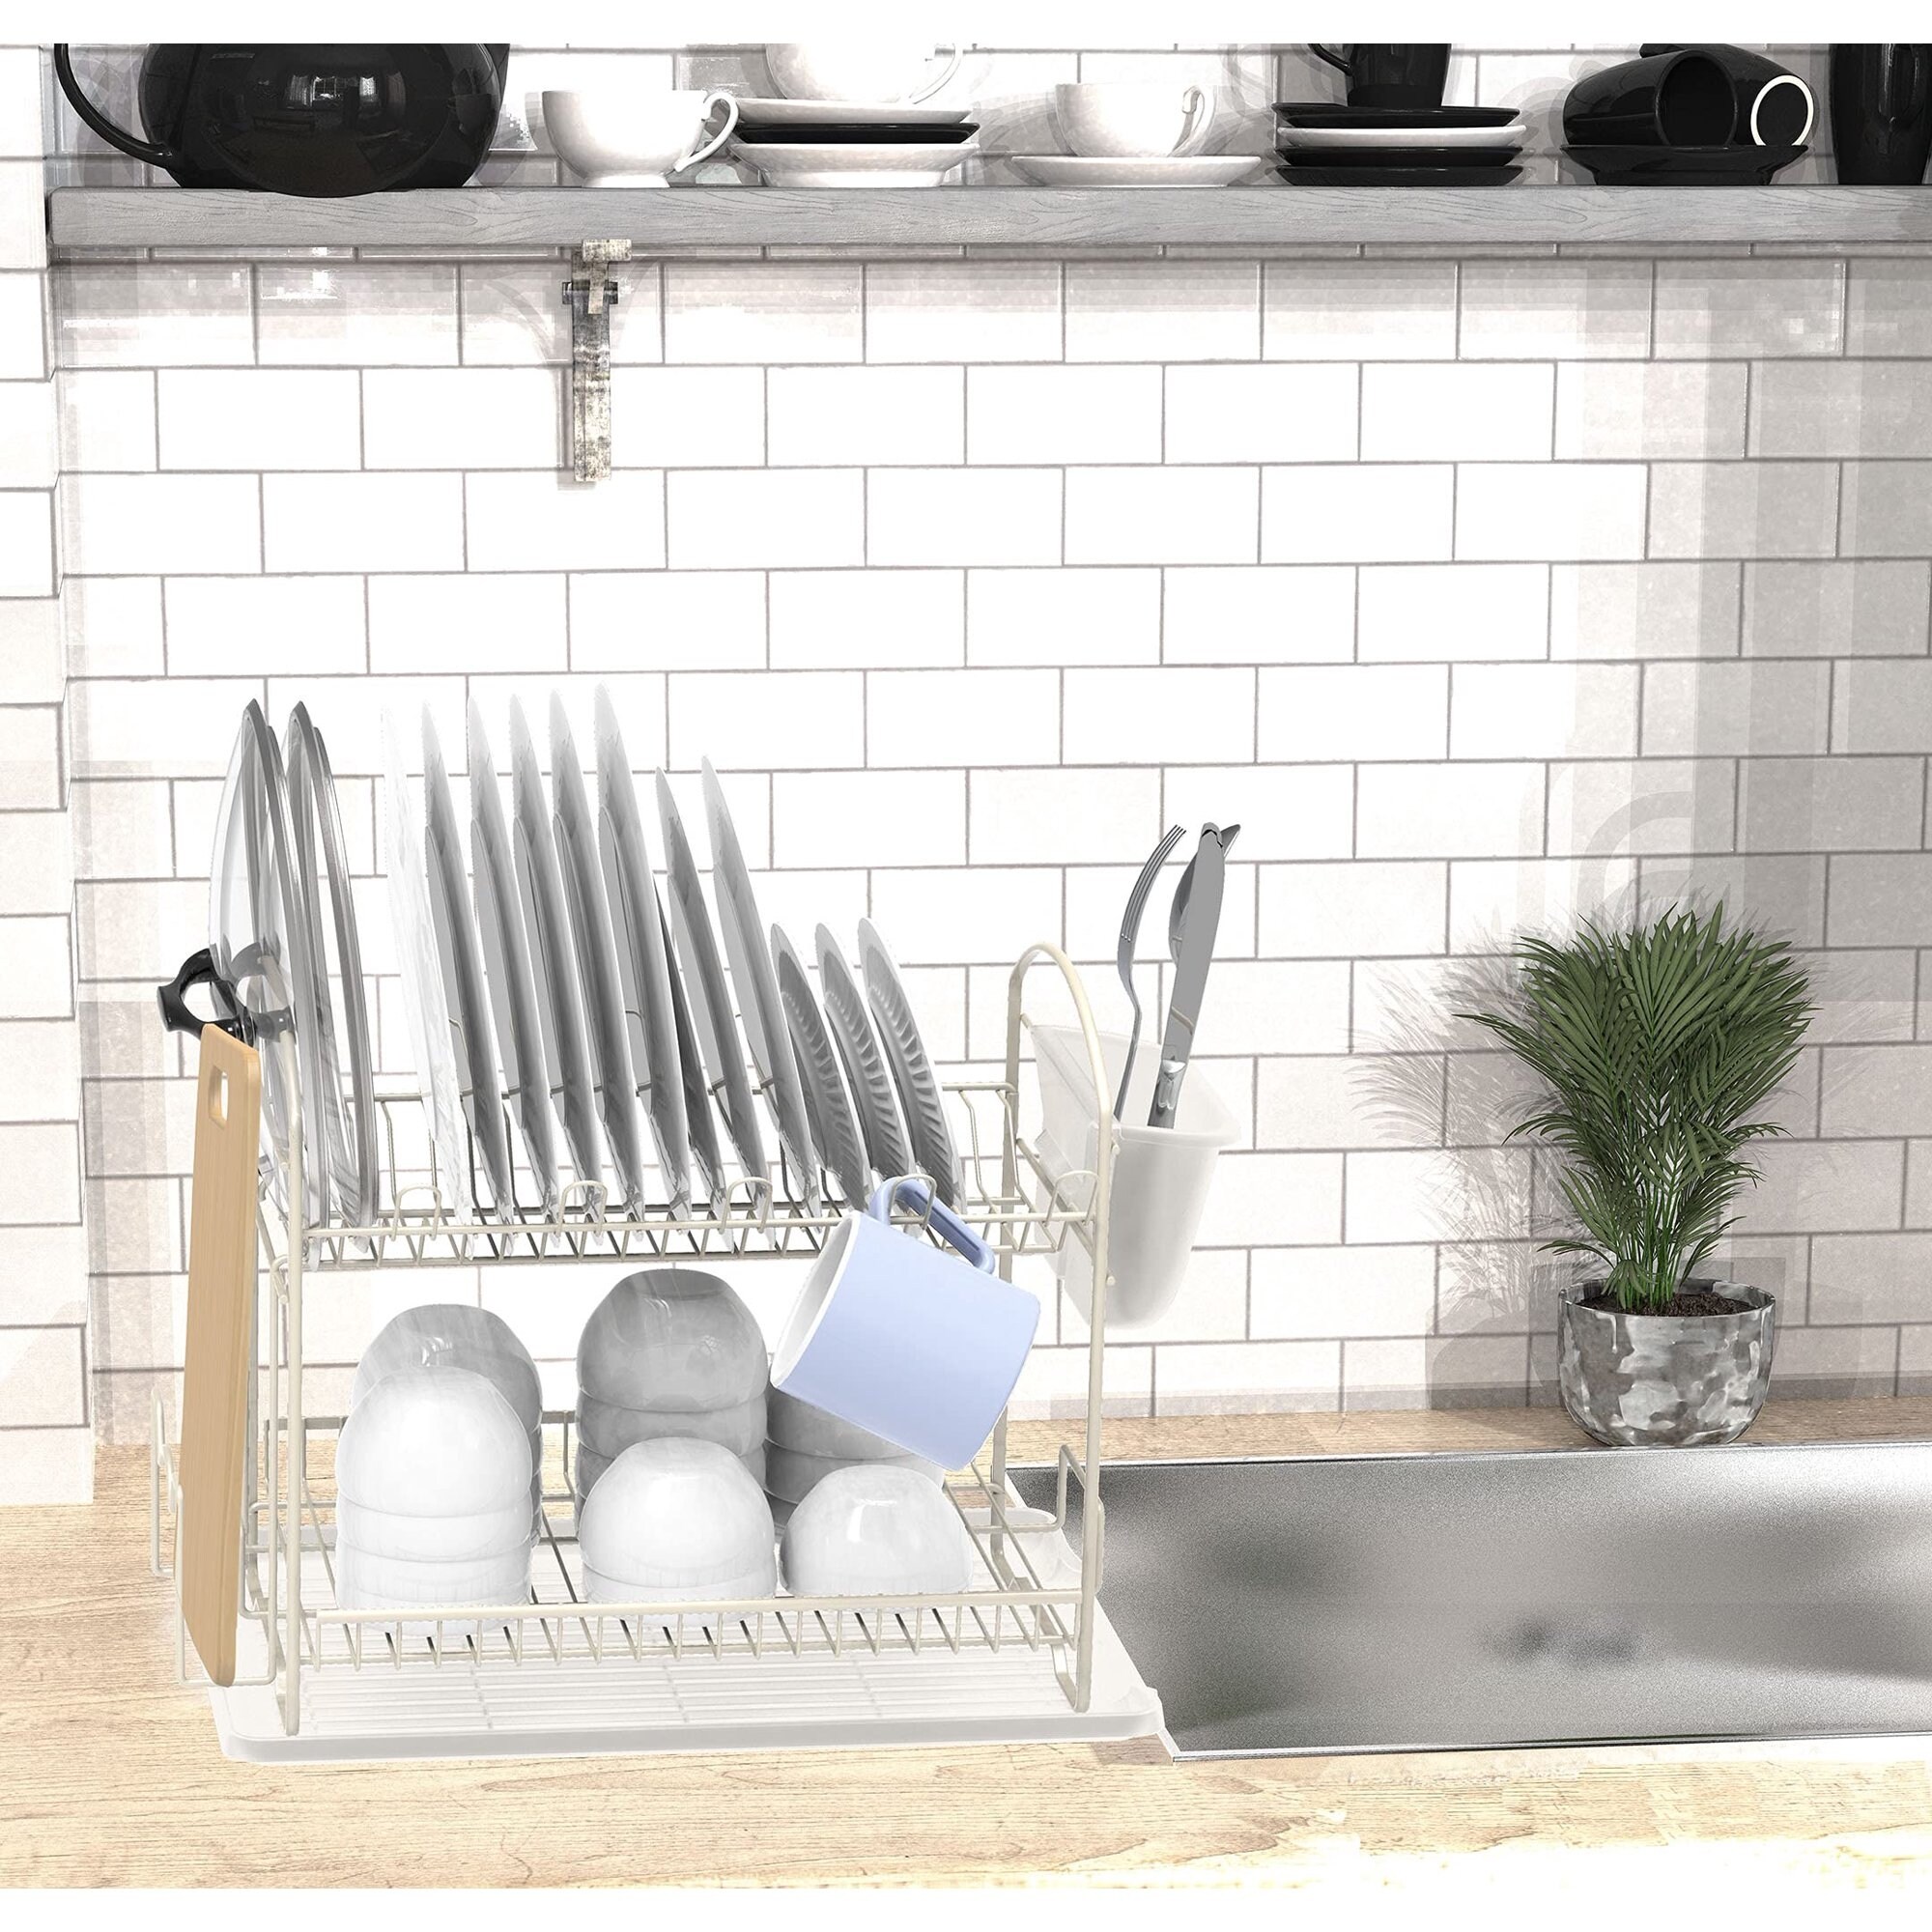 https://ak1.ostkcdn.com/images/products/is/images/direct/c02d91ce66855b66571f10dd0450a4a5d424867c/2-Tier-Dish-Rack-with-Drainboard%2C-White.jpg